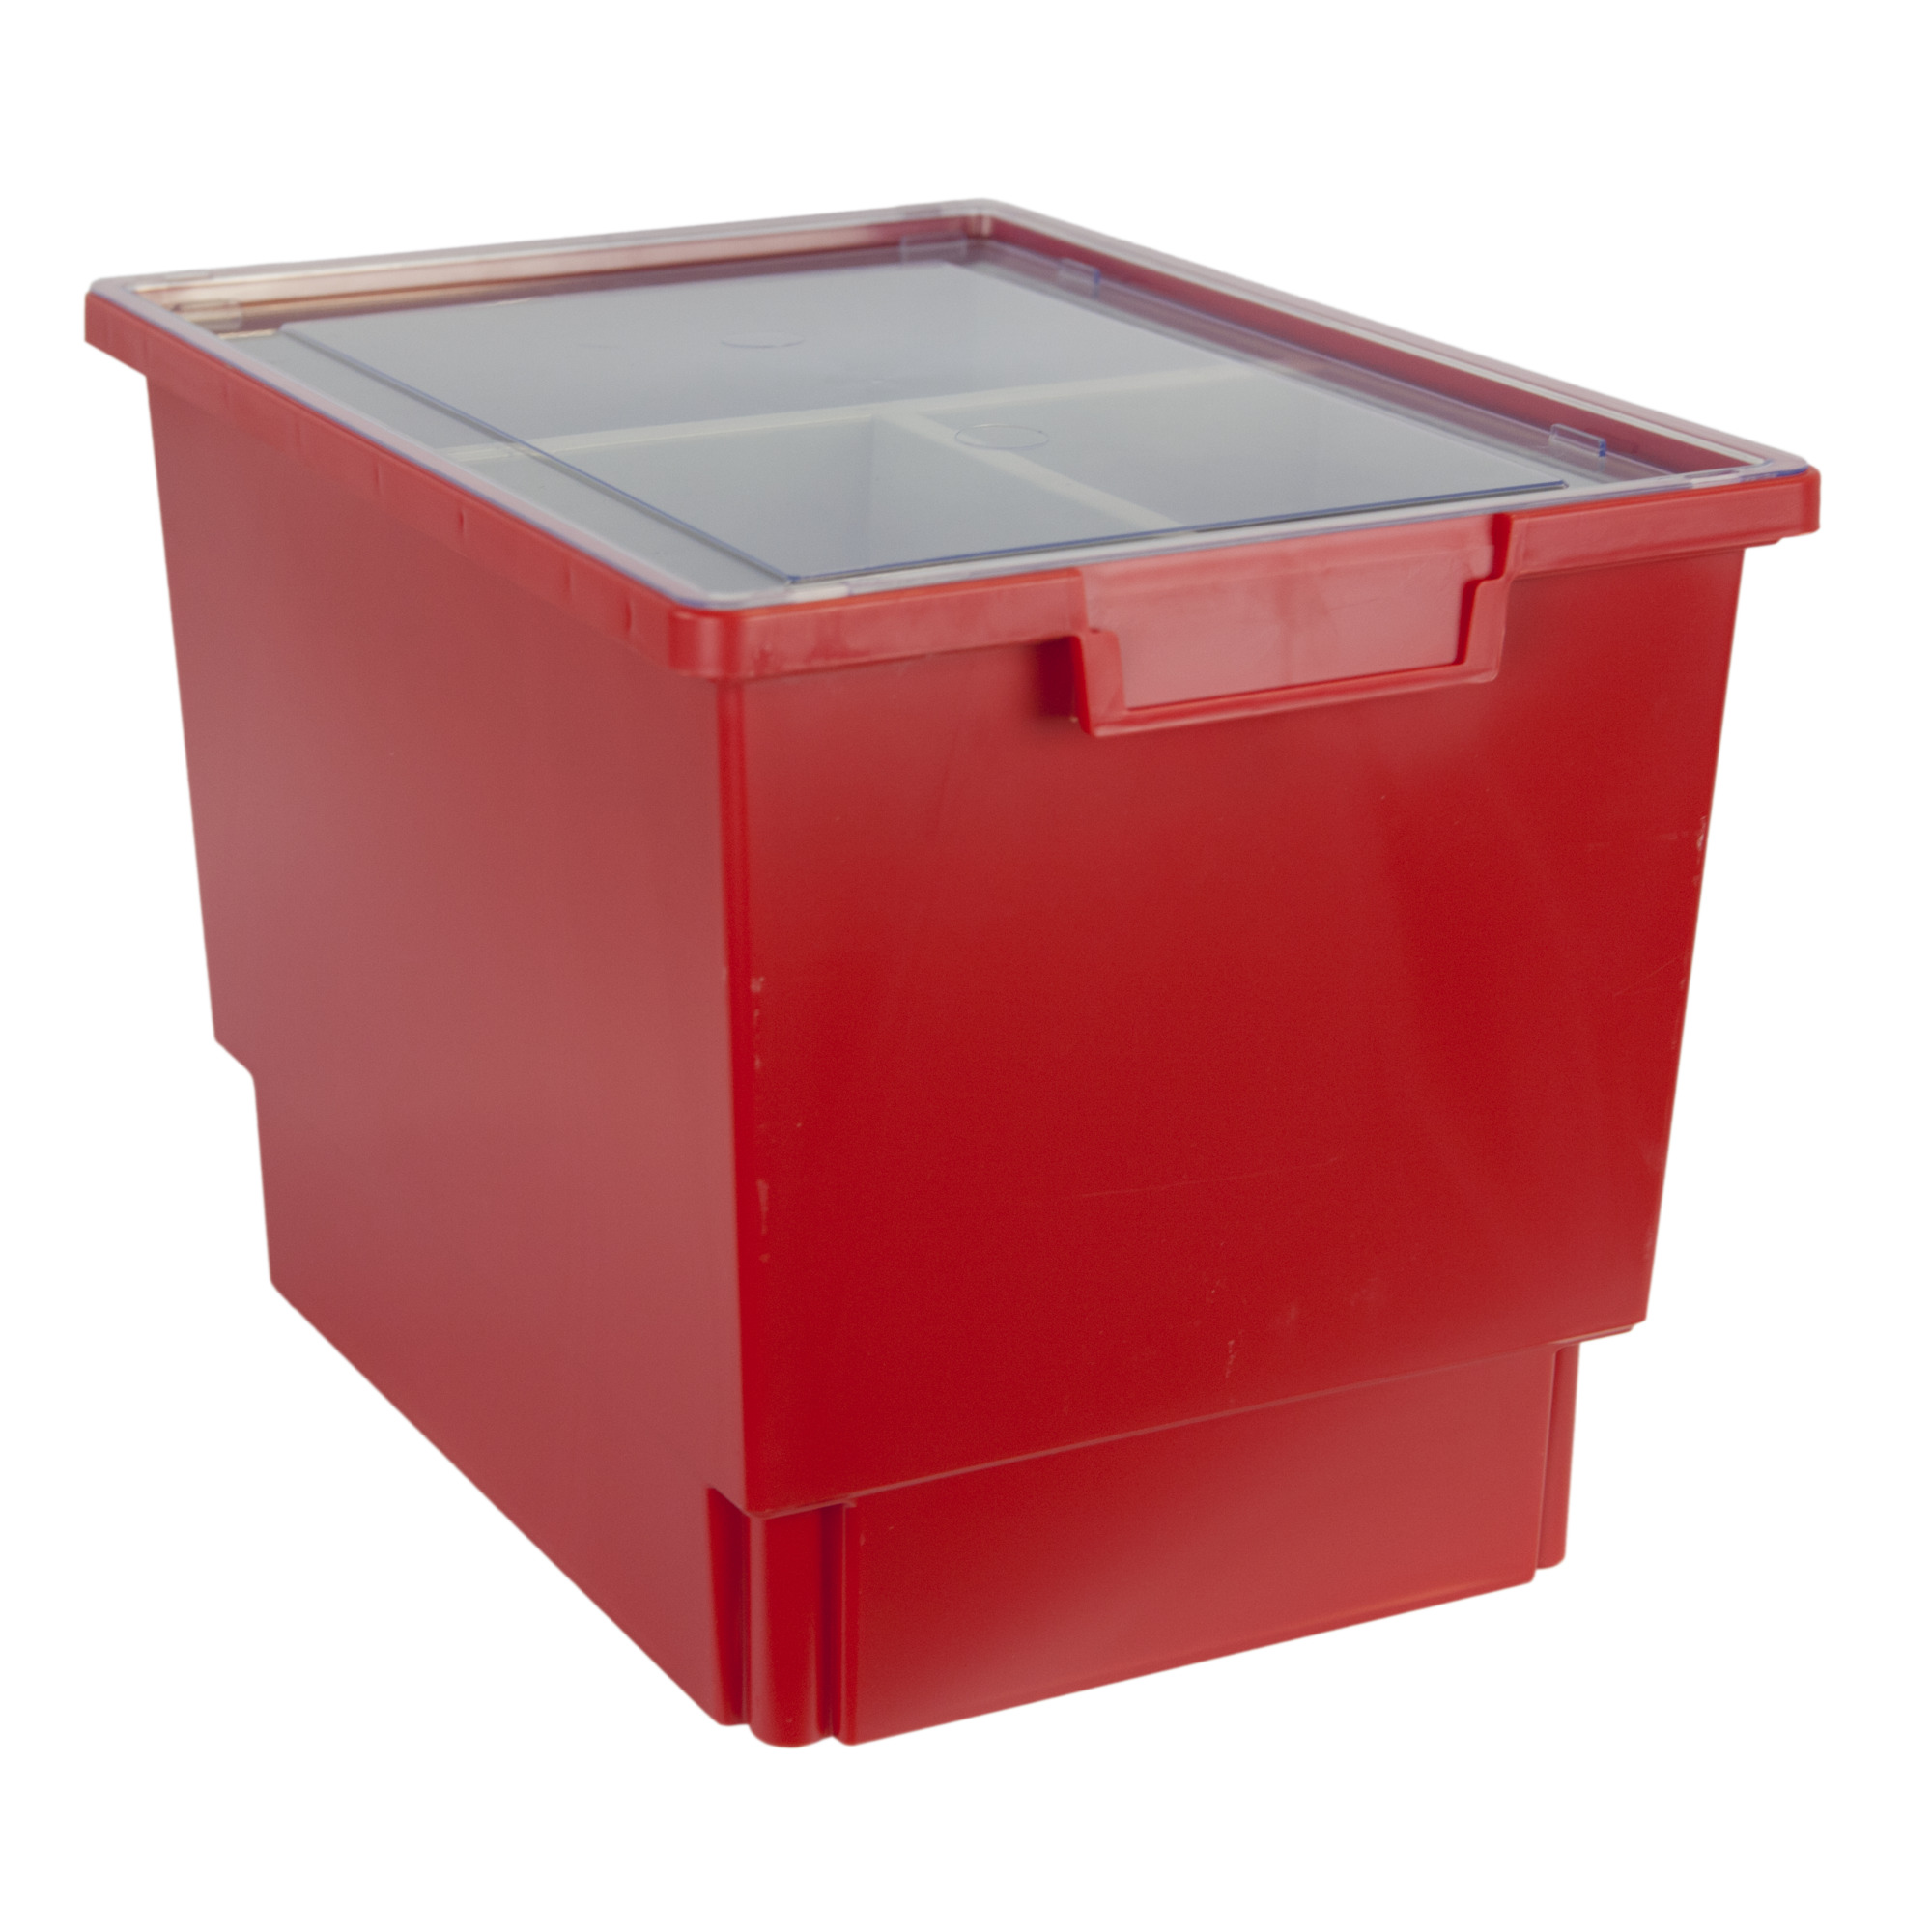 StorWerks, Slim Line 12Inch Tray Kit (3 x Inserts) Red-3PK, Included (qty.) 3, Material Plastic, Height 12 in, Model - Certwood CE1954PR-NK0004-3